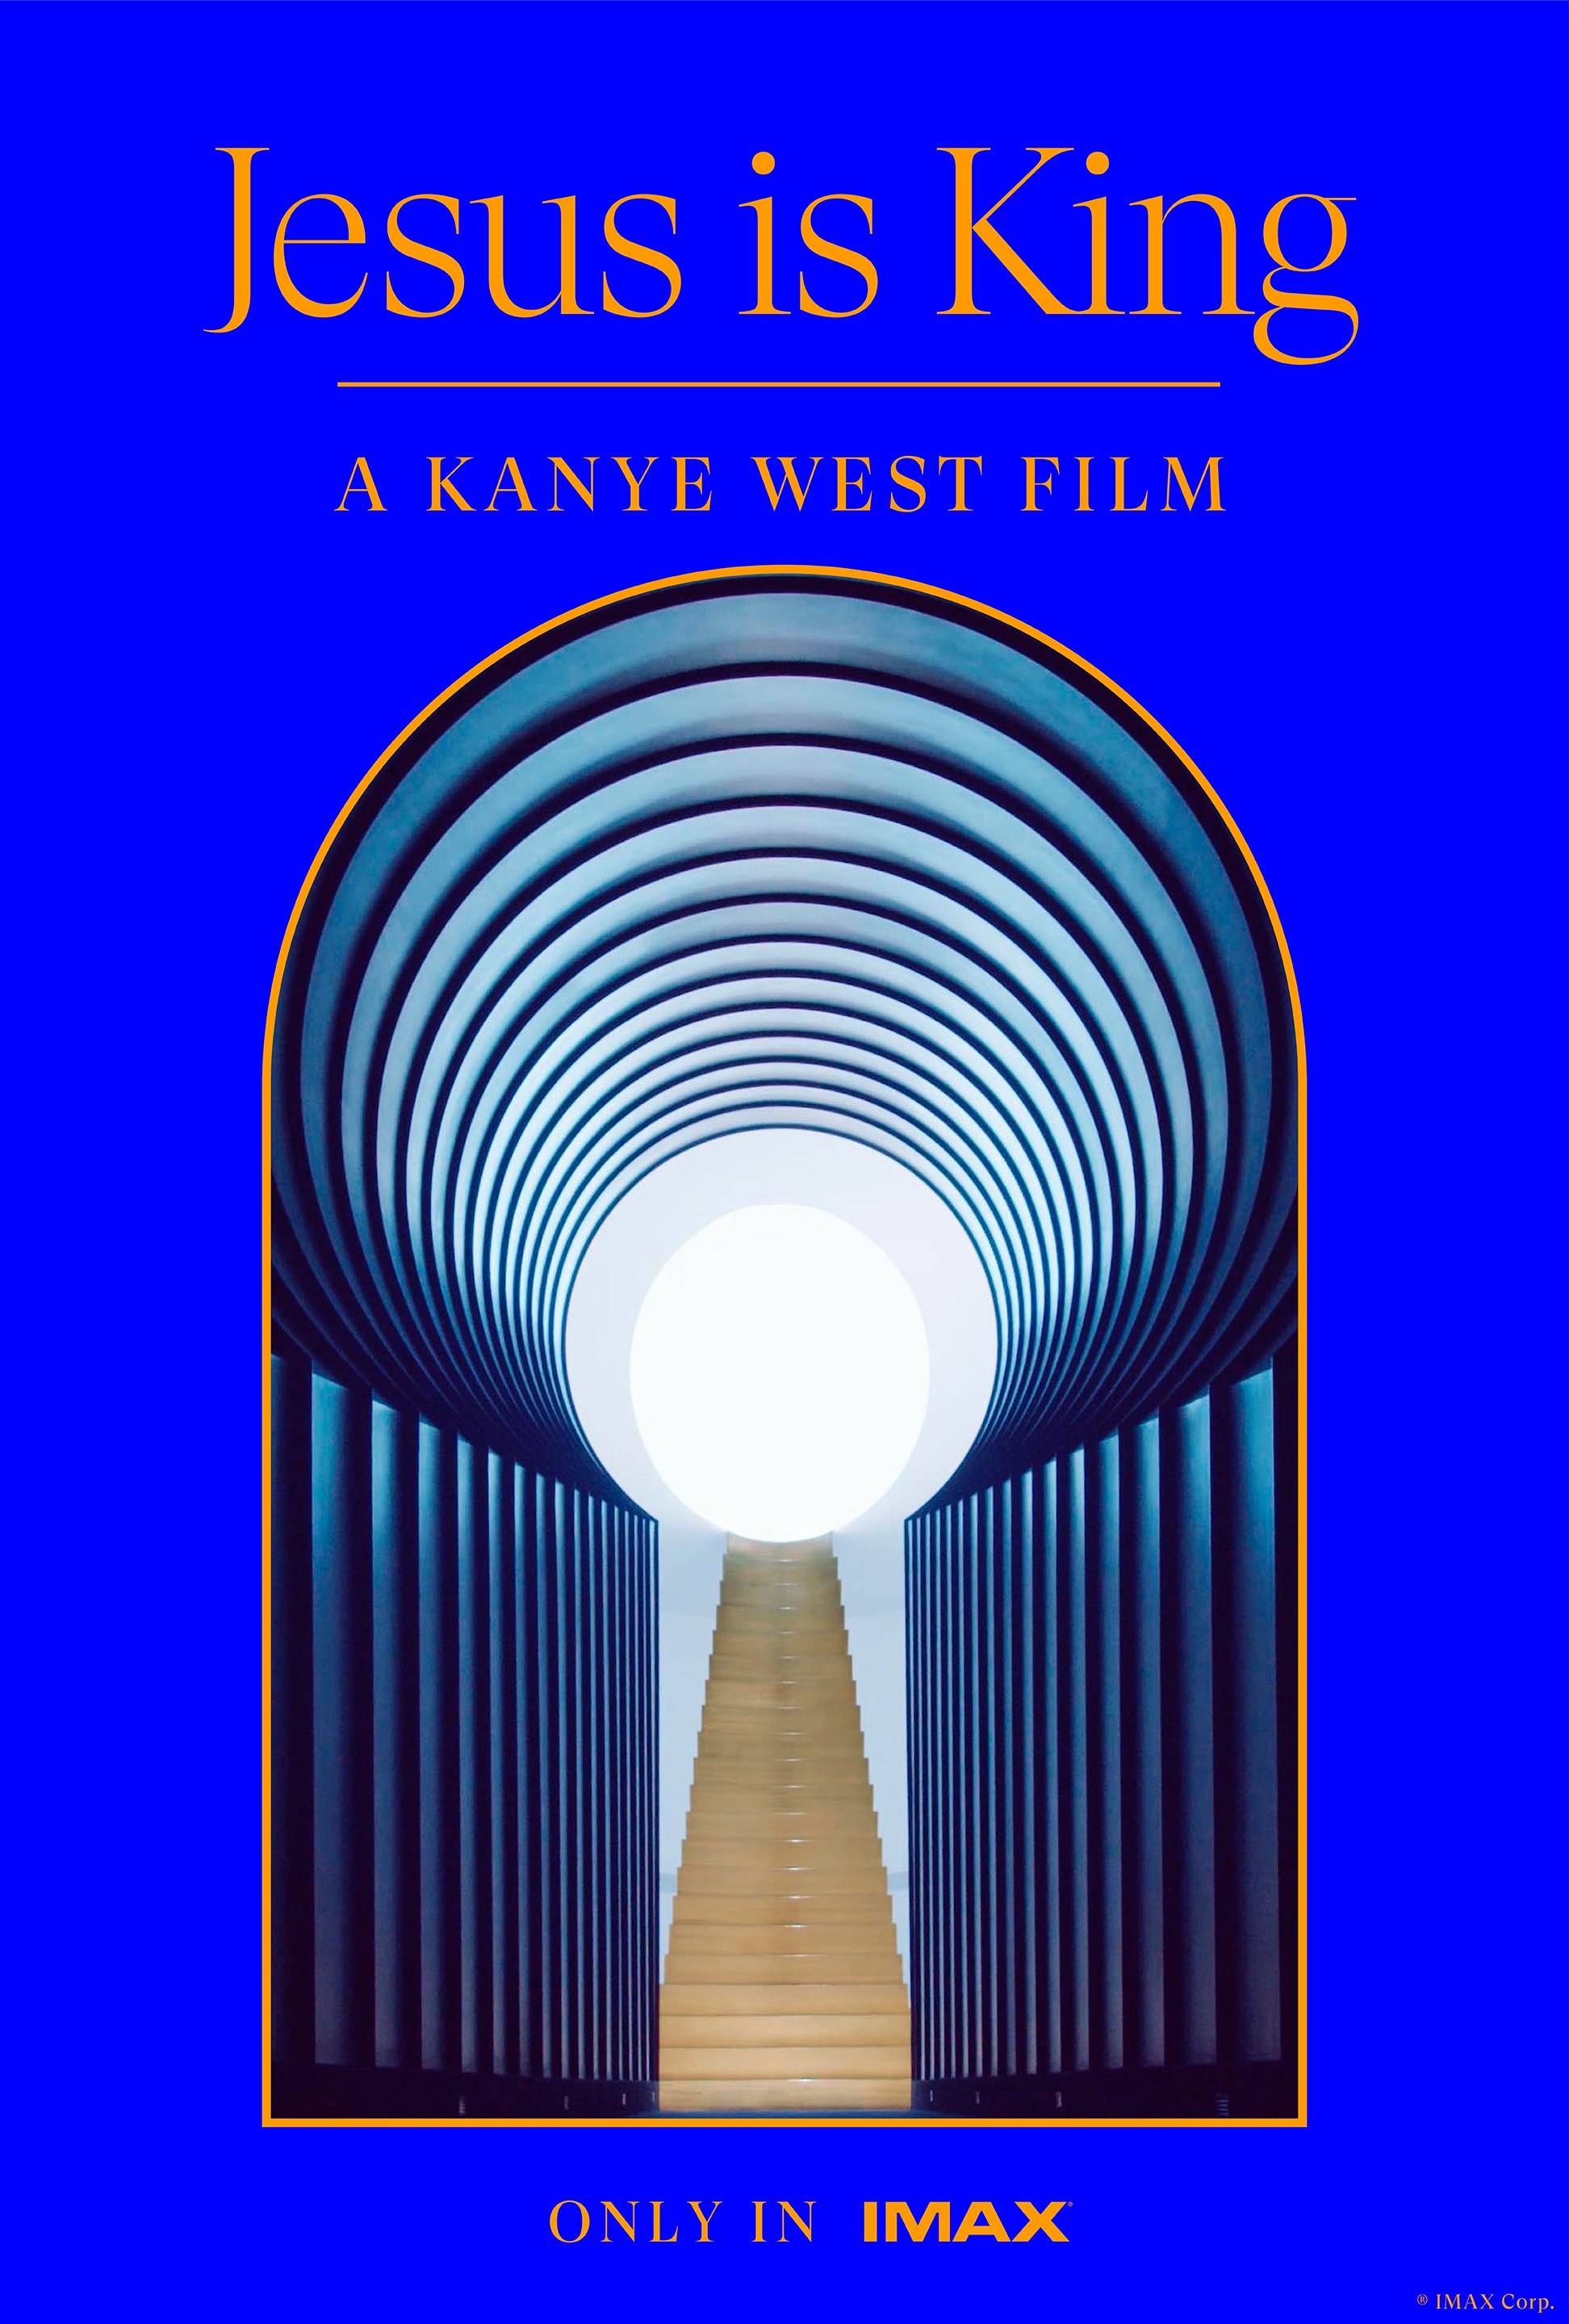 Kanye West Announces <i></noscript>Jesus Is King</i> Documentary” title=”IMAX-Jesus_is_King_27x40_RGB-1569769733″ data-original-id=”344133″ data-adjusted-id=”344133″ class=”sm_size_full_width sm_alignment_center ” data-image-use=”multiple_use” />
</div>
</div>
</div>
</div>
</div>
</section>
<section data-particle_enable=